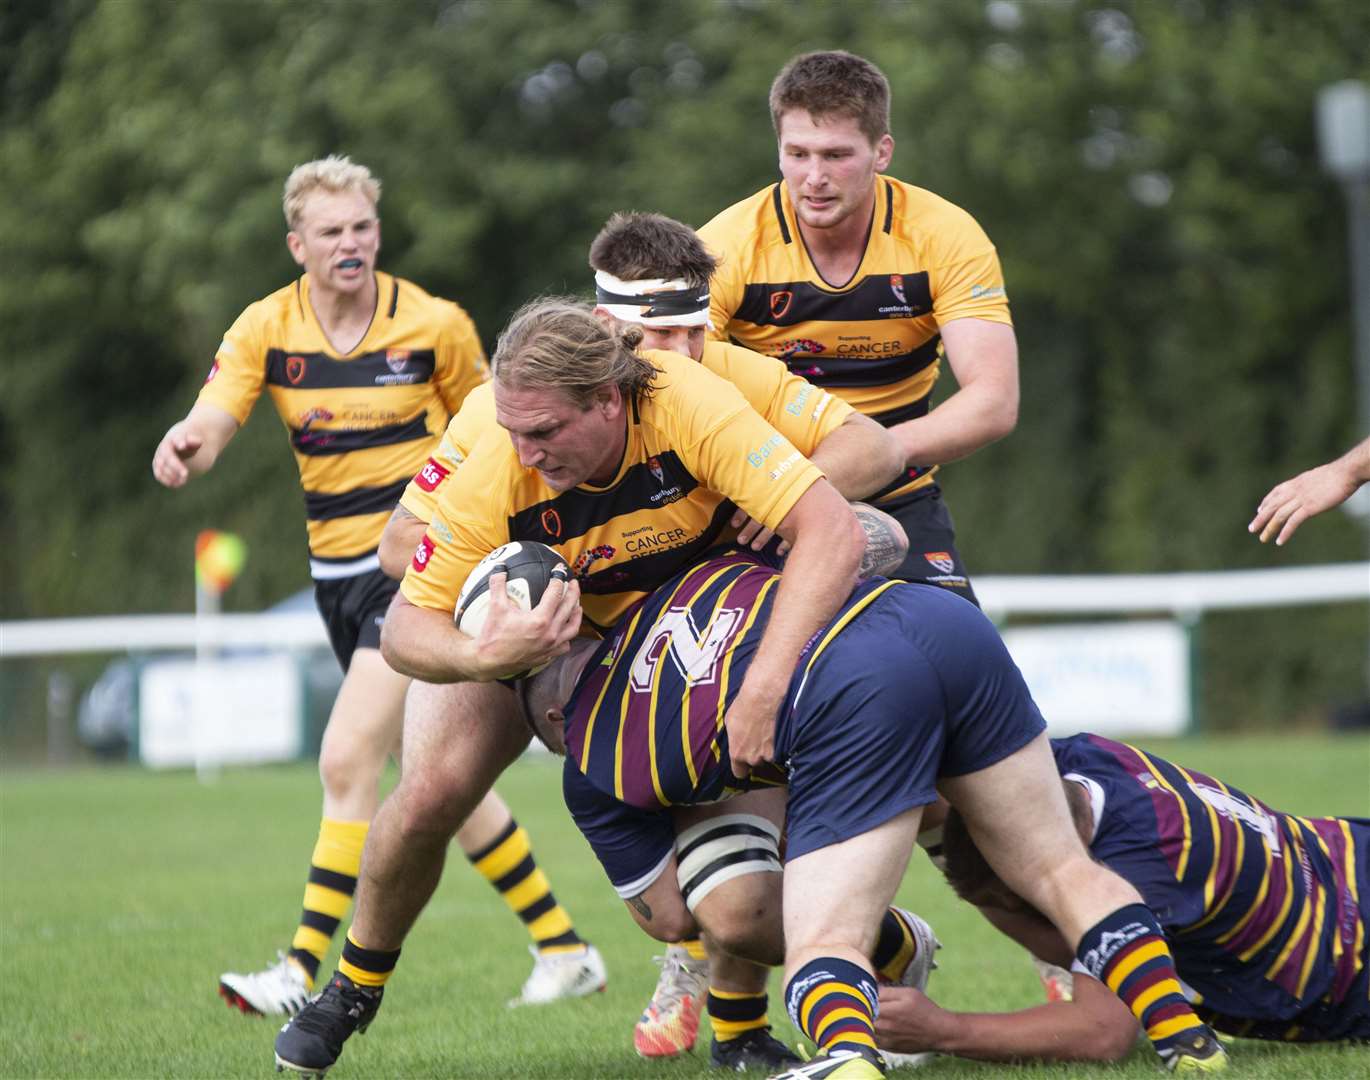 Royce Cadman of Canterbury surges forward on Saturday Picture: Phillipa Hilton